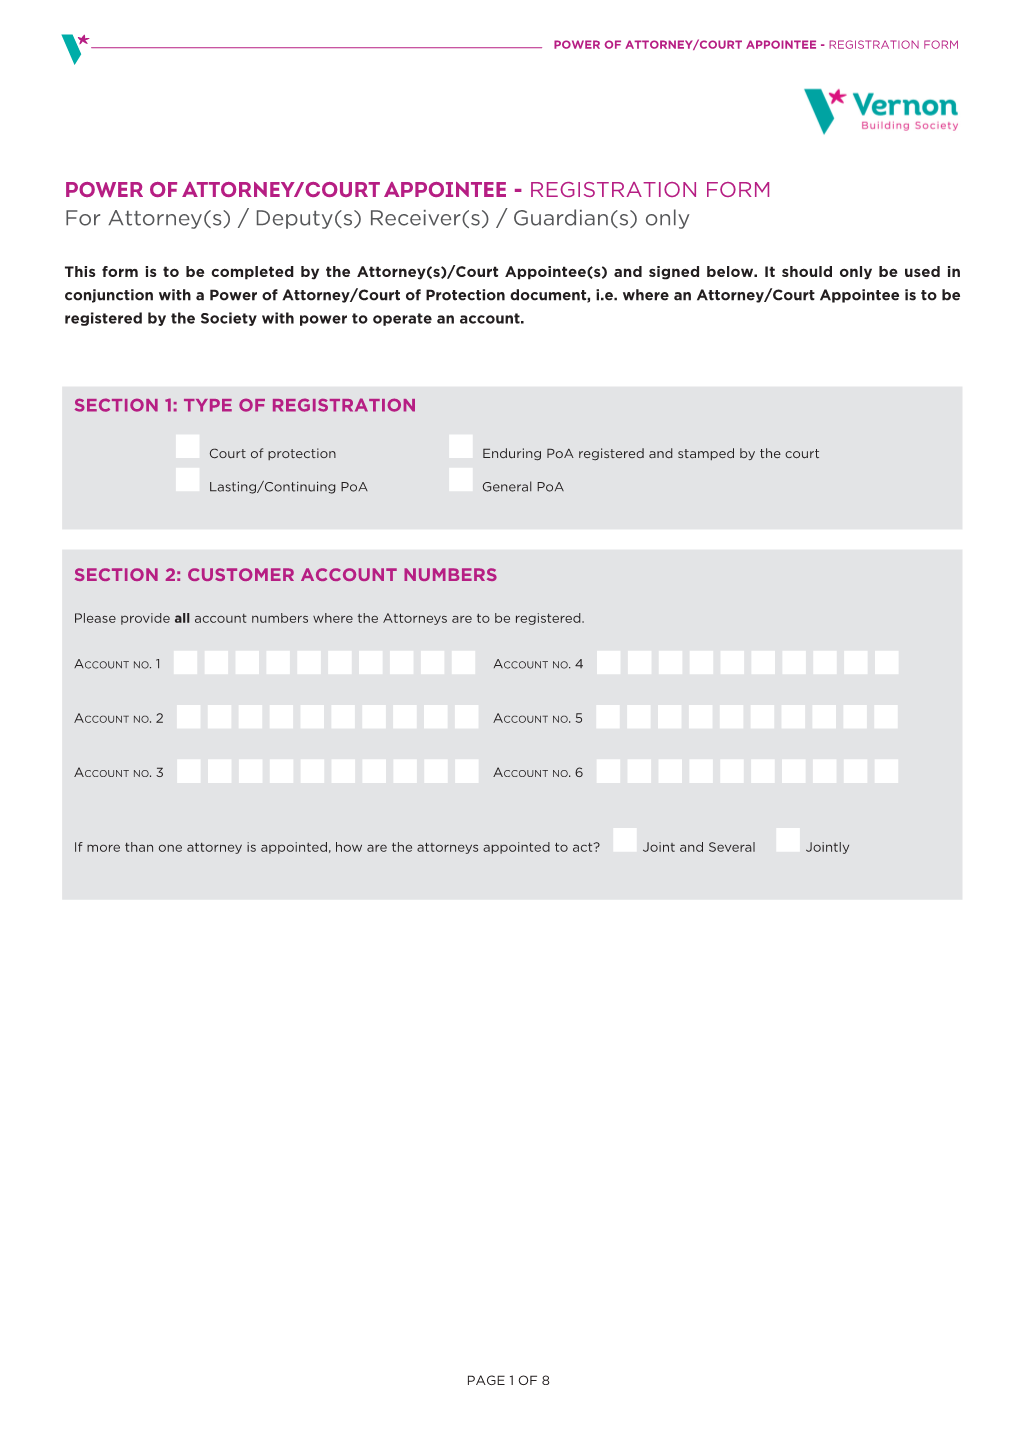 Power of Attorney Application Form